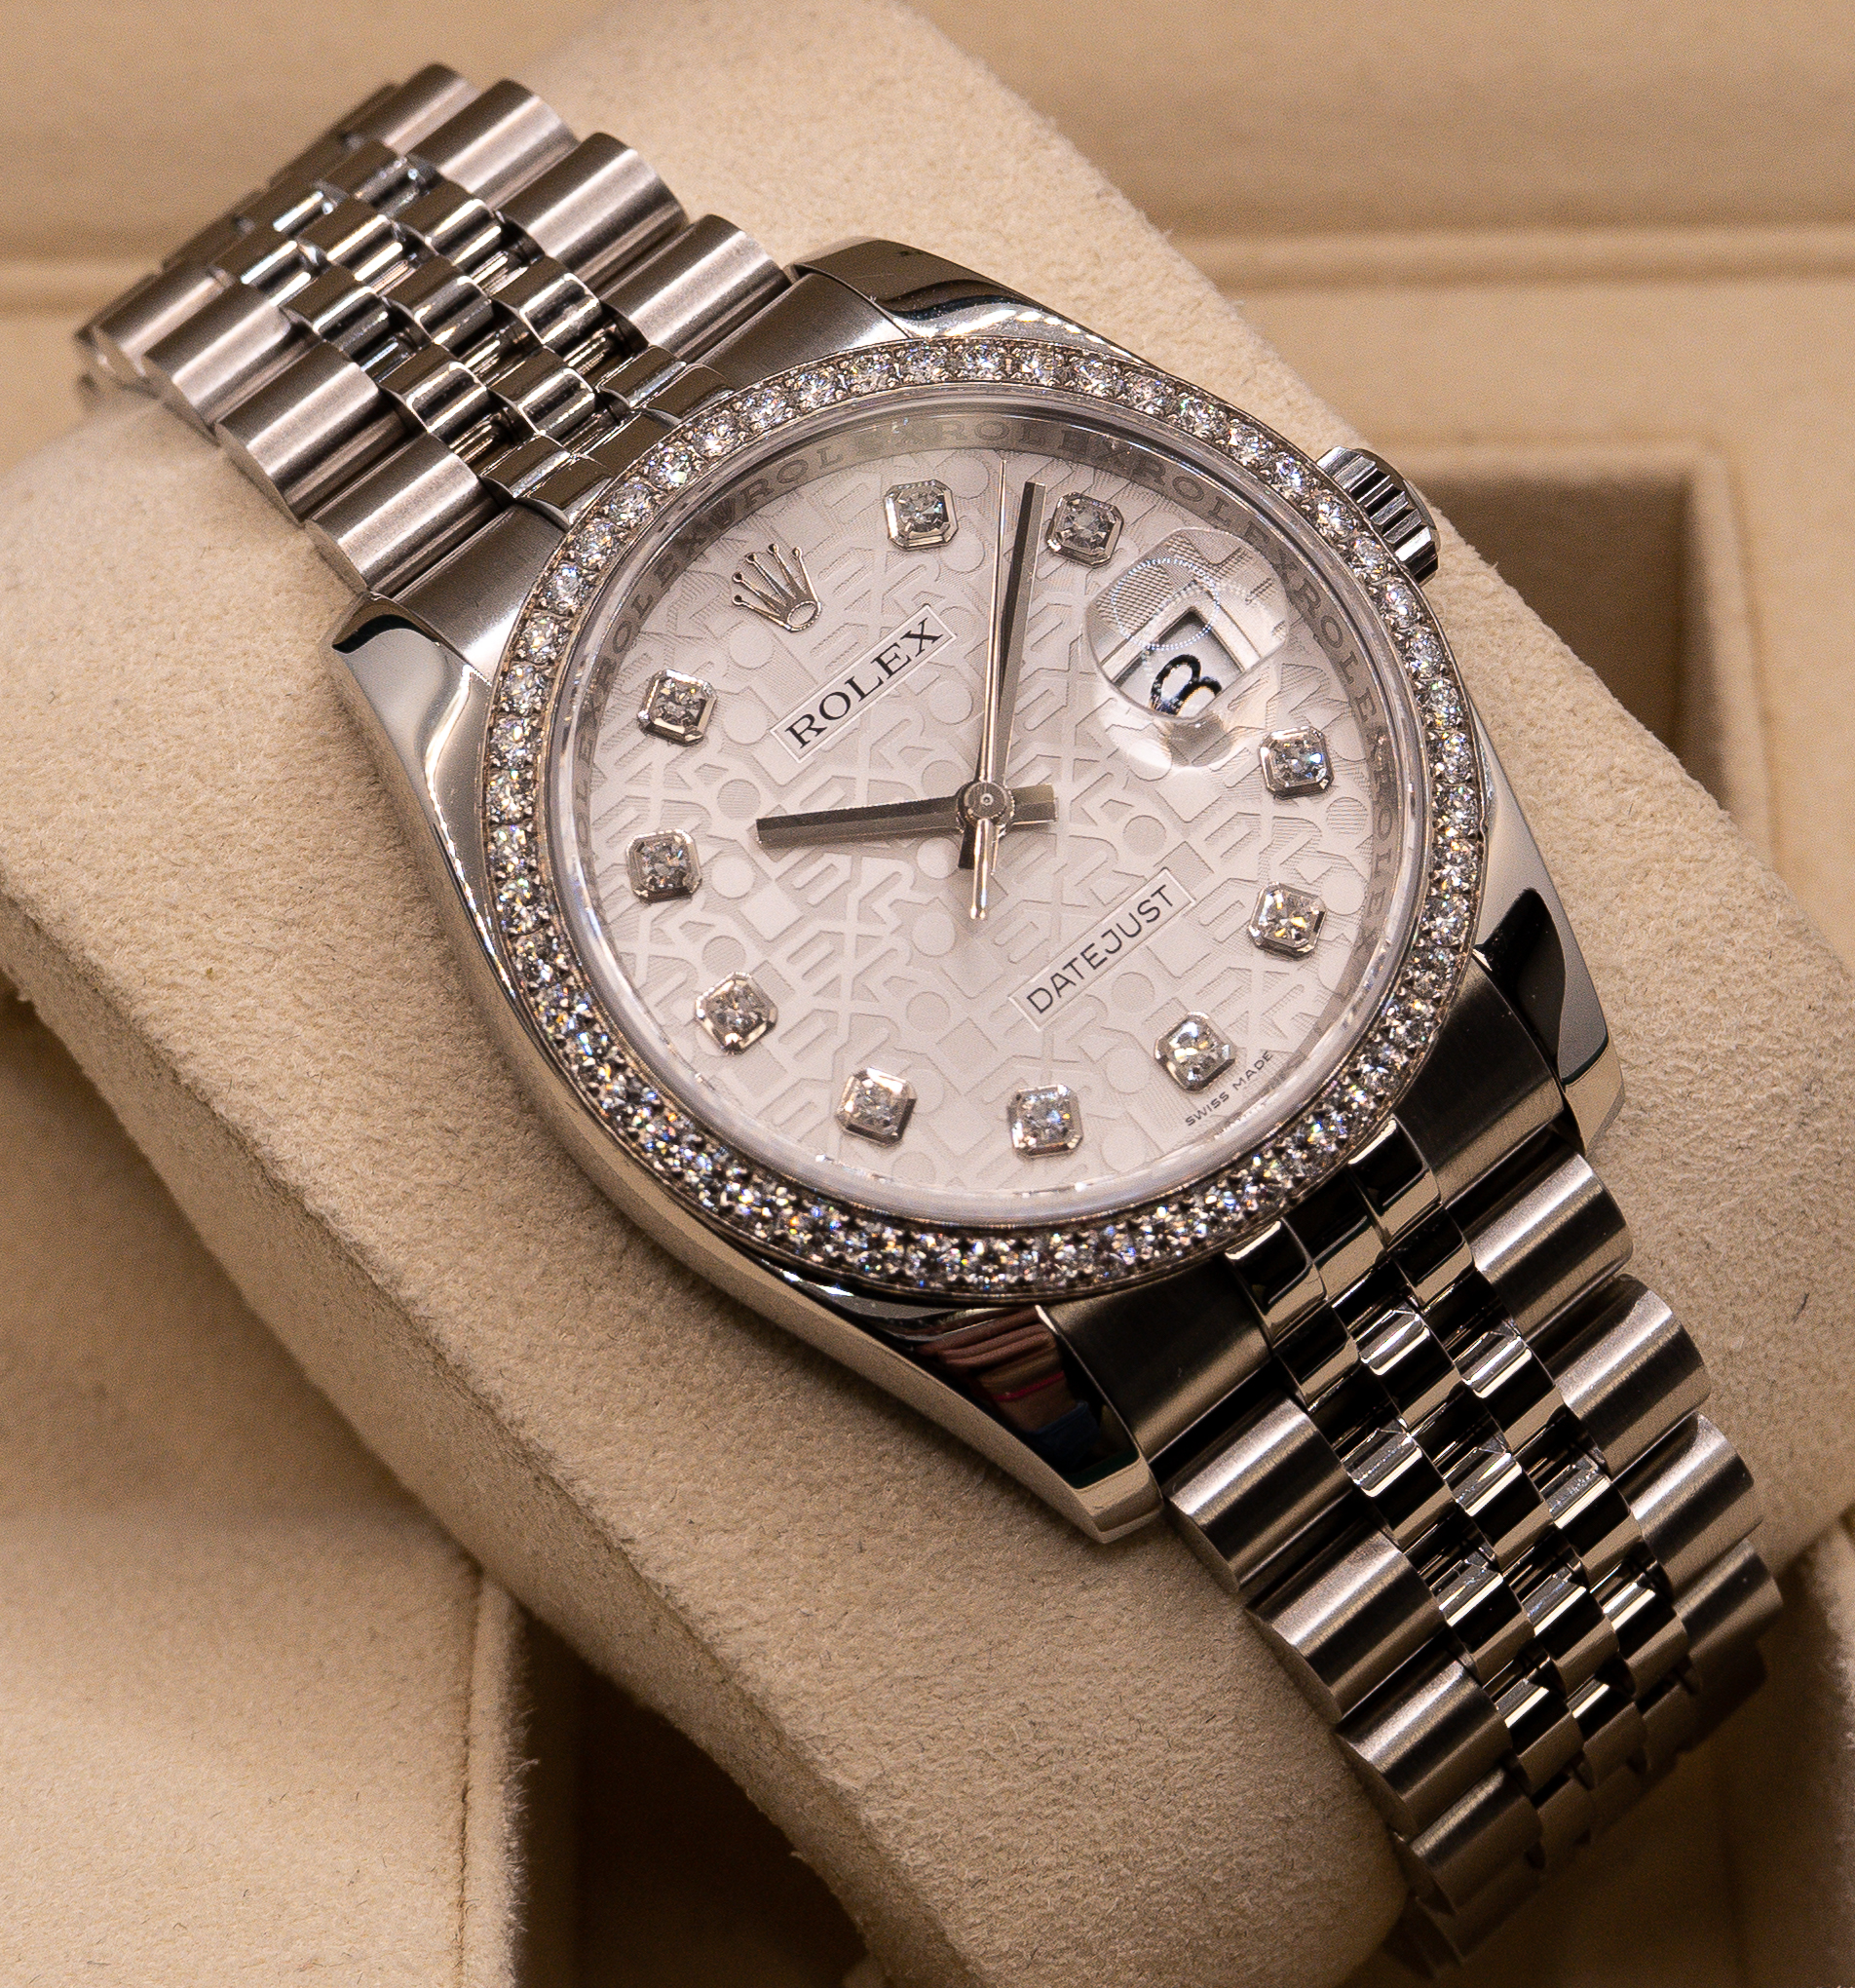 TopNotch Watch offers a variety of Rolexes including the timeless Datejust